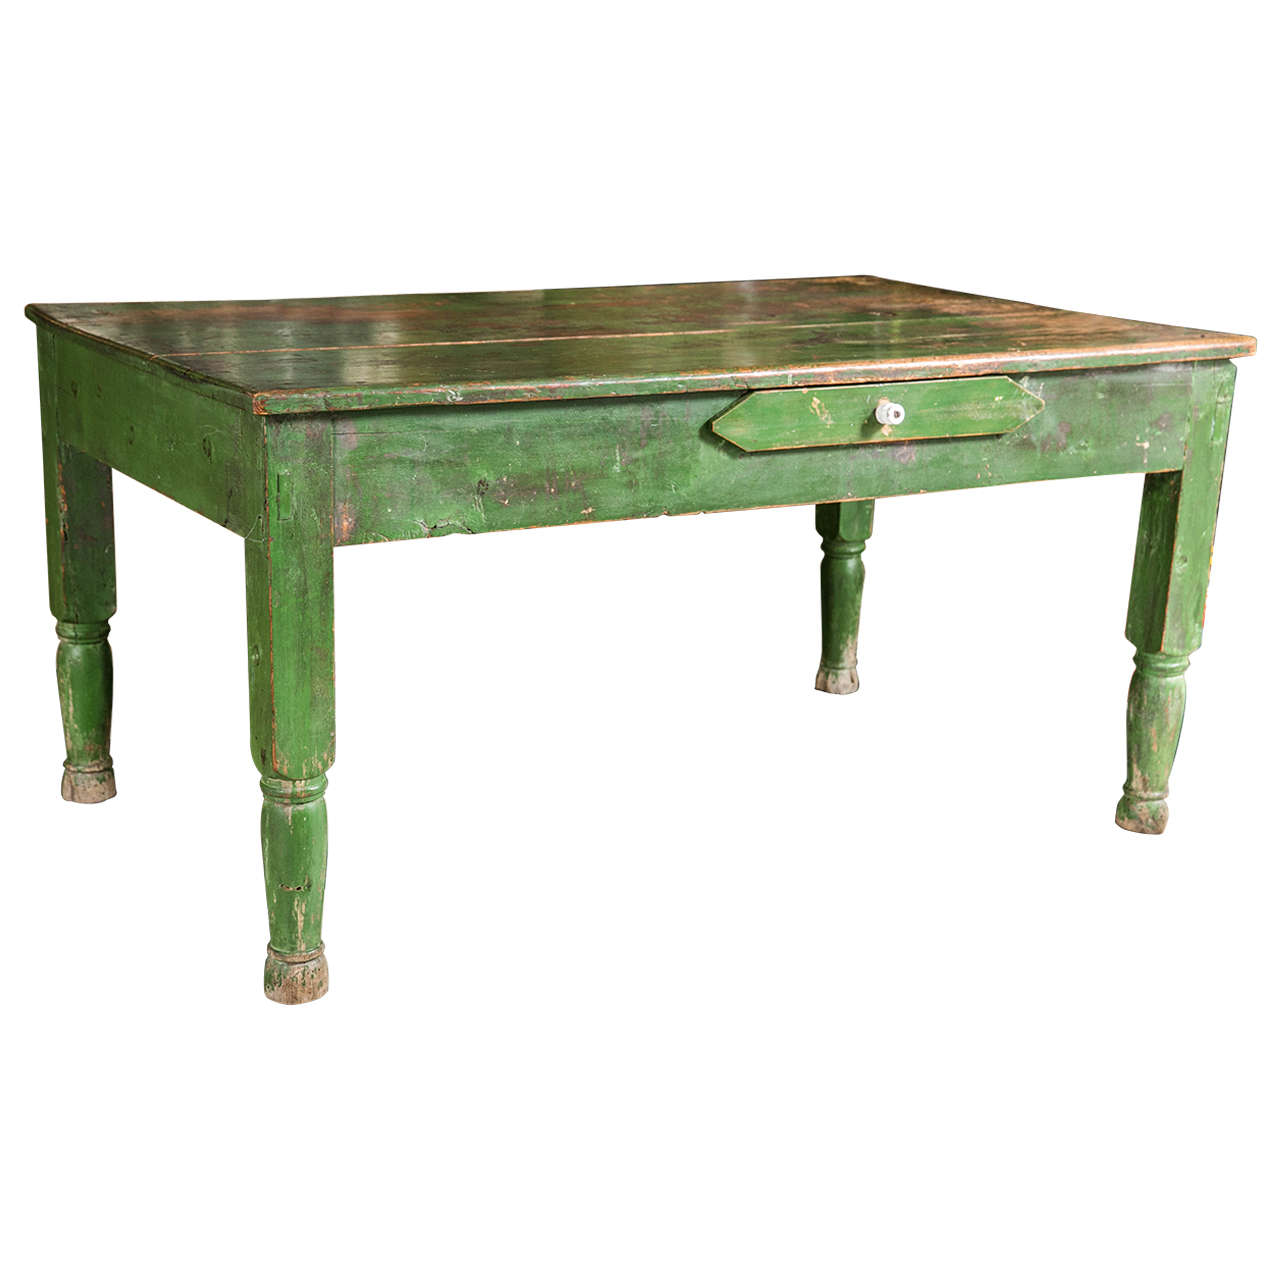 19th Century One-Drawer Table with Original Paint